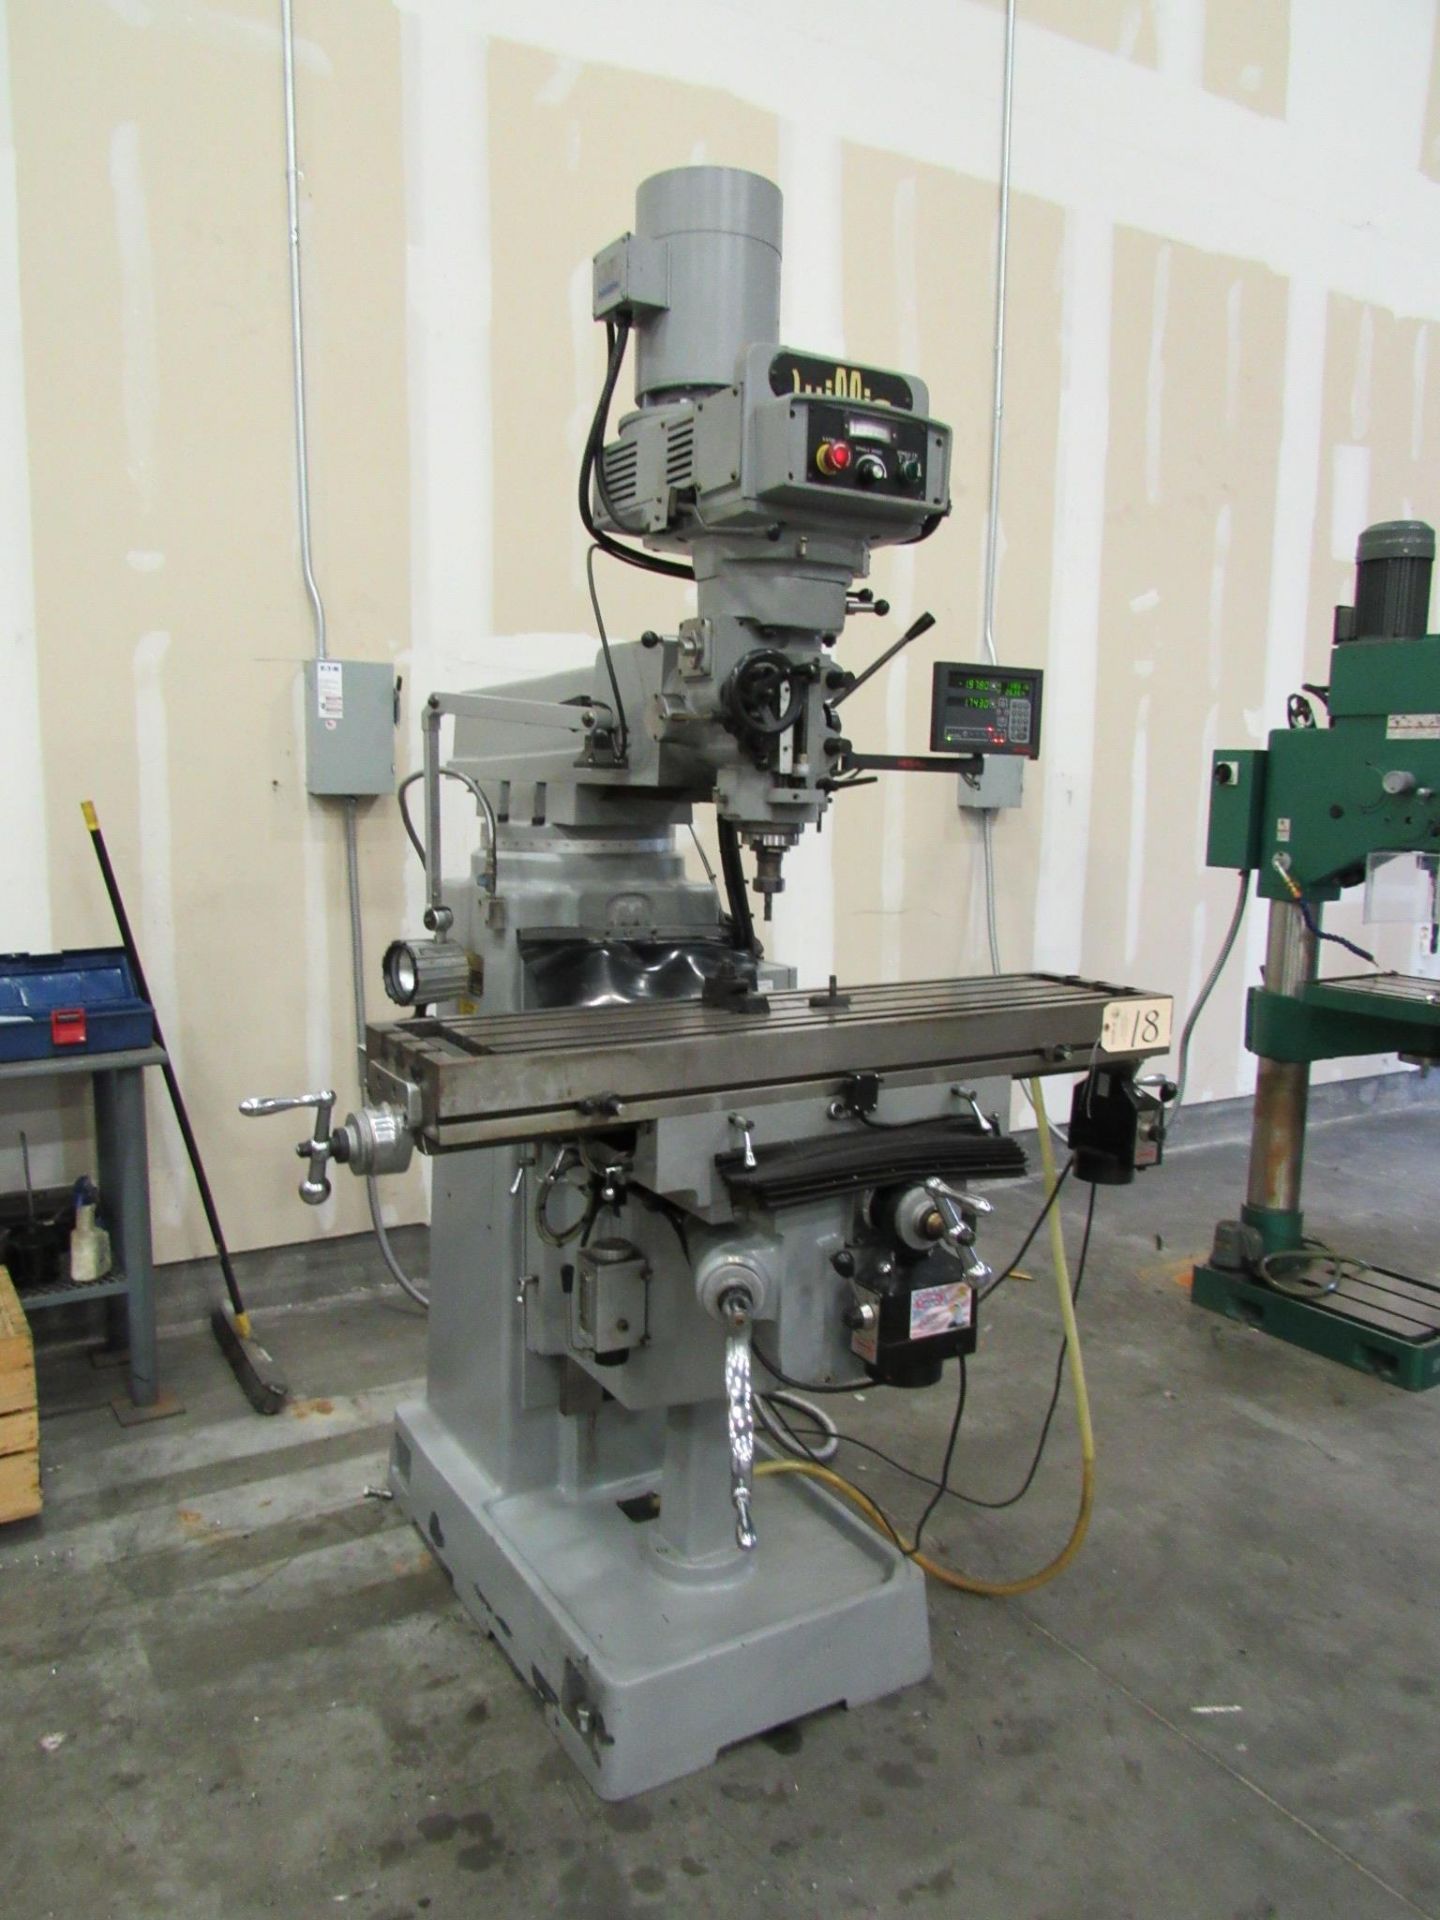 Willis Model 1250II-FV Variable Speed Knee Mill with 9'' x 48'' Table, Dual Servo Feeds, Variable - Image 3 of 8